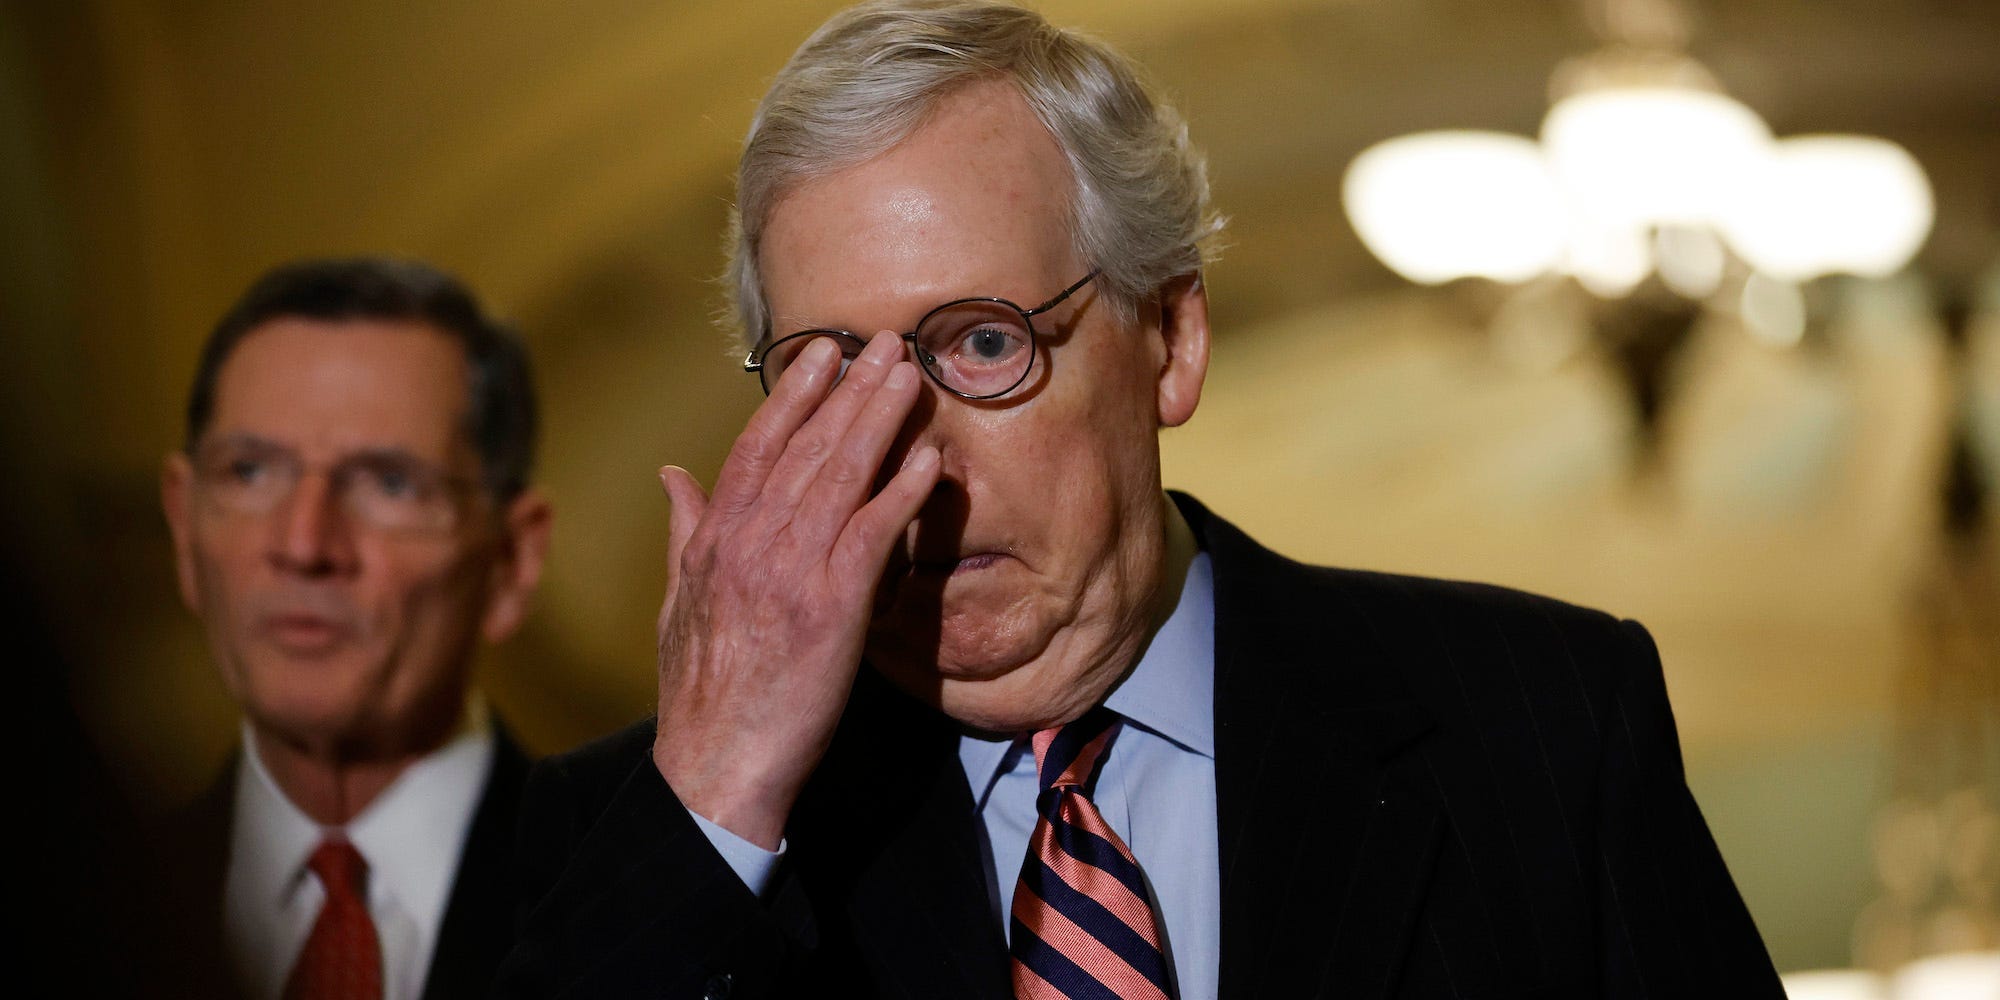 Senate Minority Leader Mitch McConnell pushes his glasses into place before talking to reporters at a press conference at the US Senate on December 14, 2021.